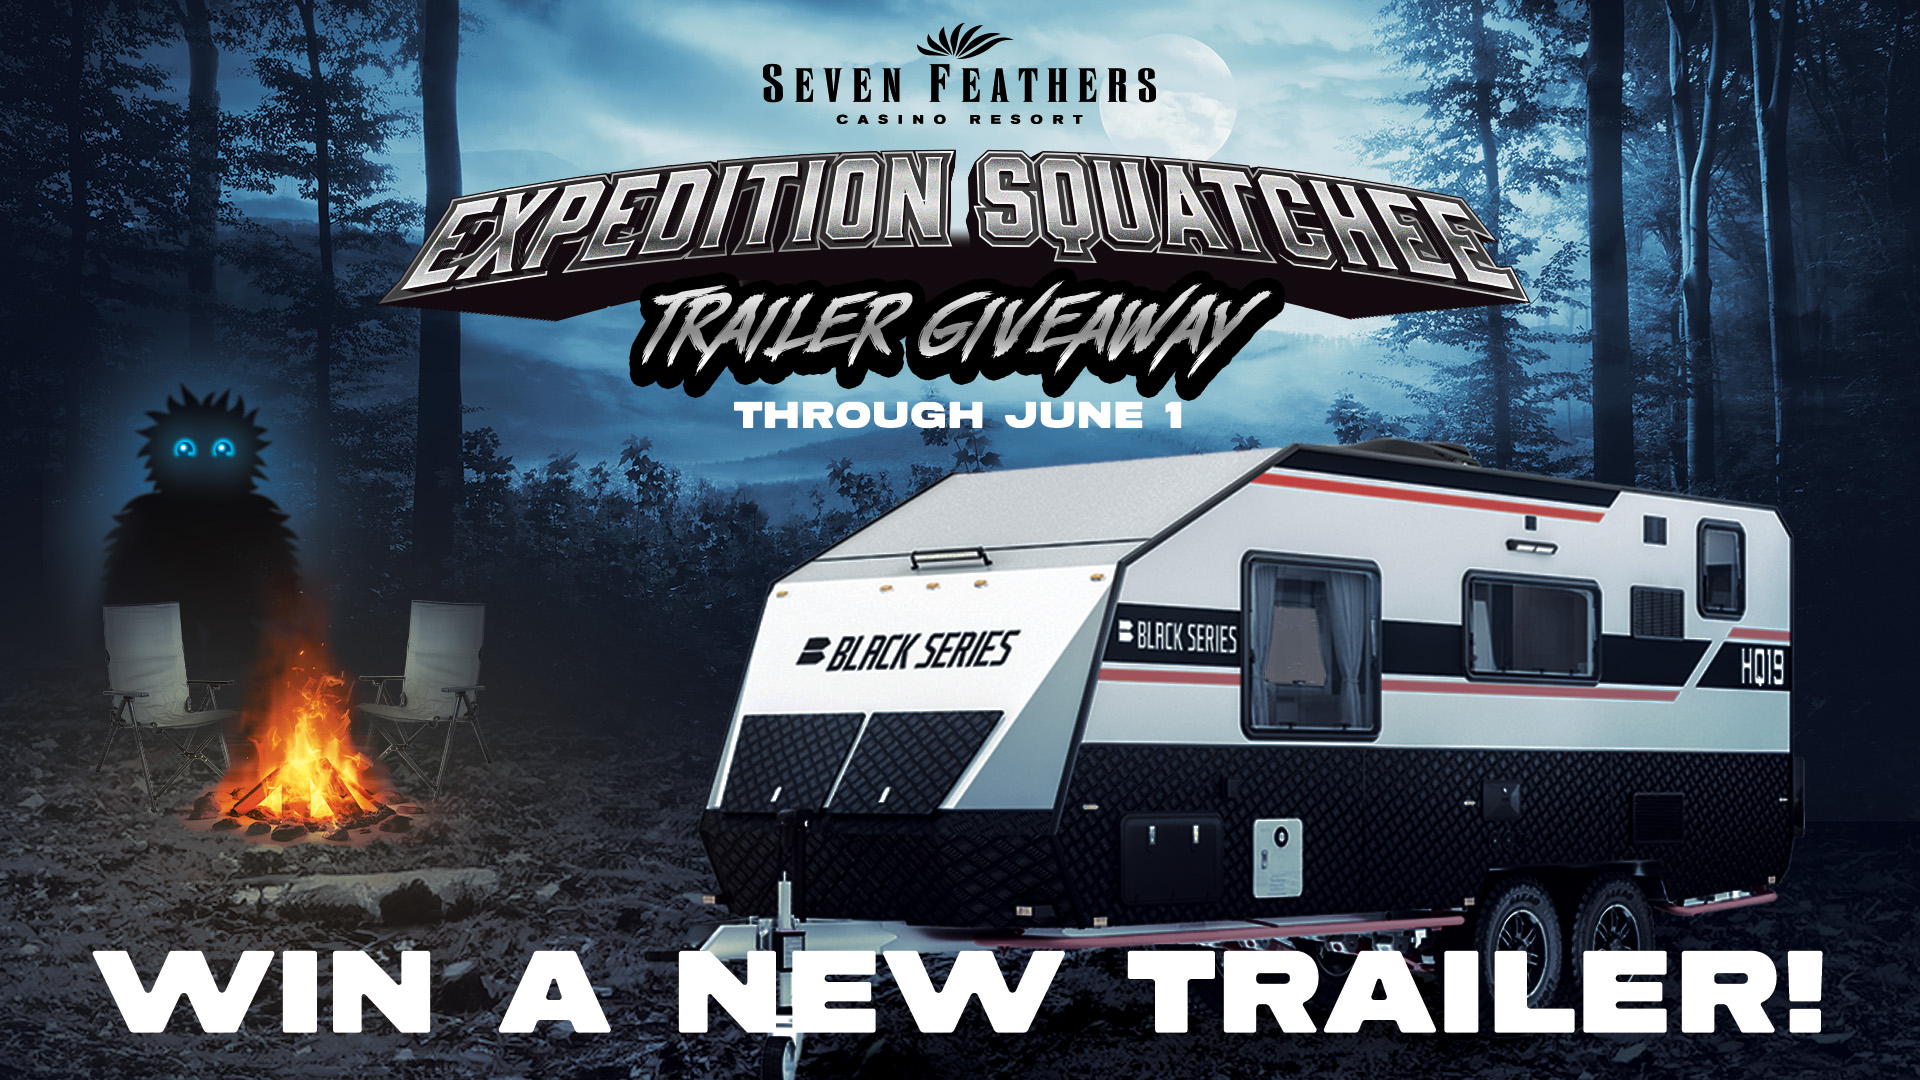 You could win a new travel trailer at Seven Feathers Casino Resort in Canyonville Oregon